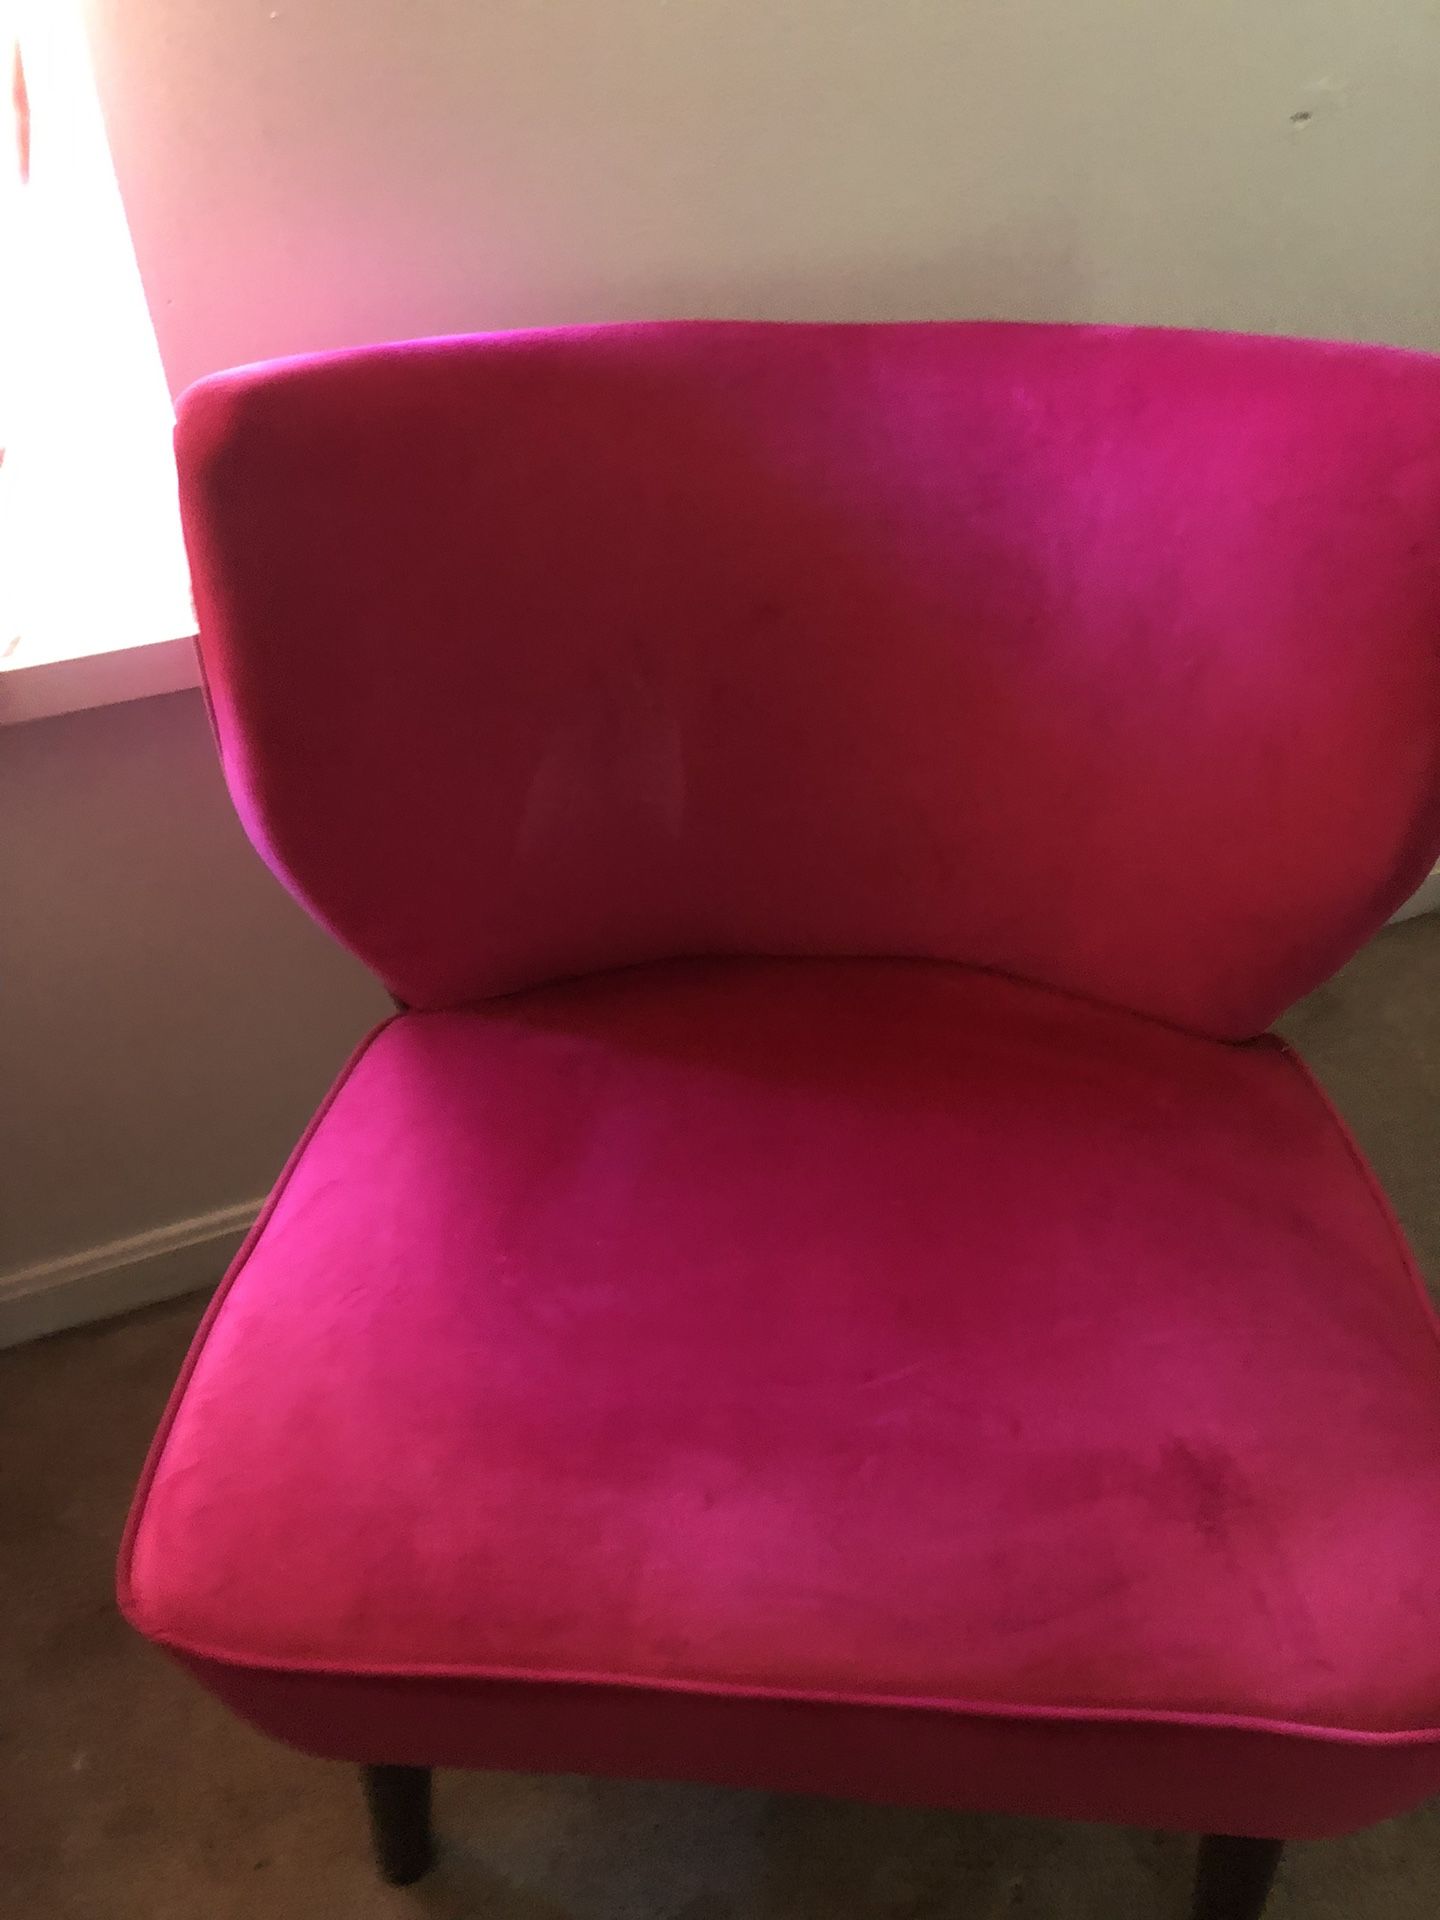 Two pink Chairs.